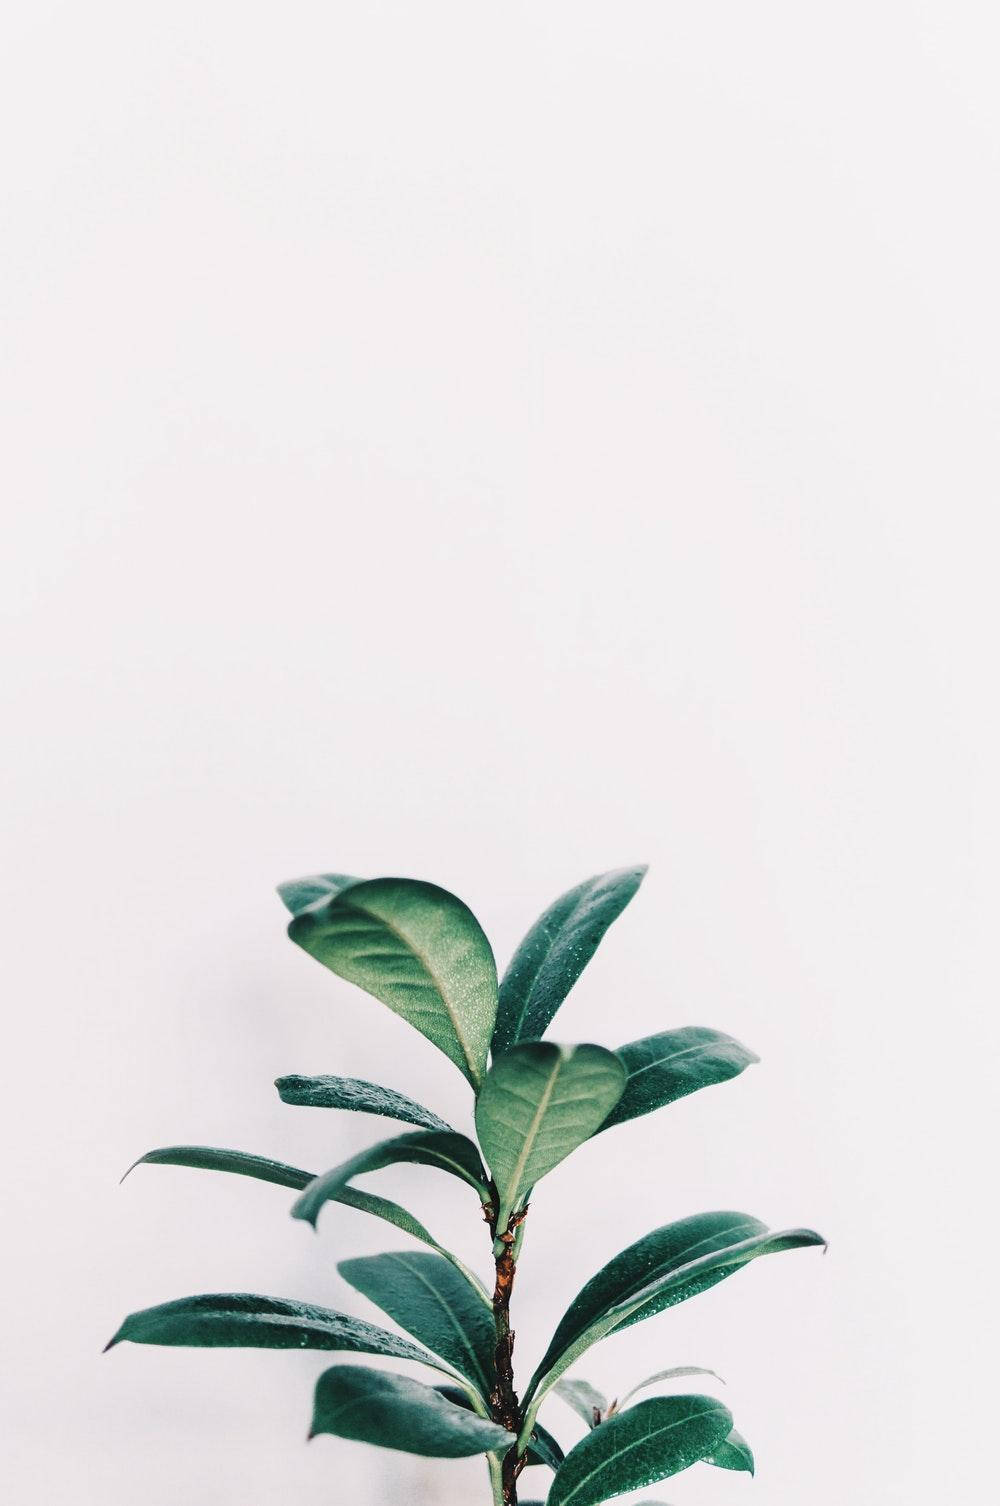 Minimalist Aesthetic Green Rubber Plant Background